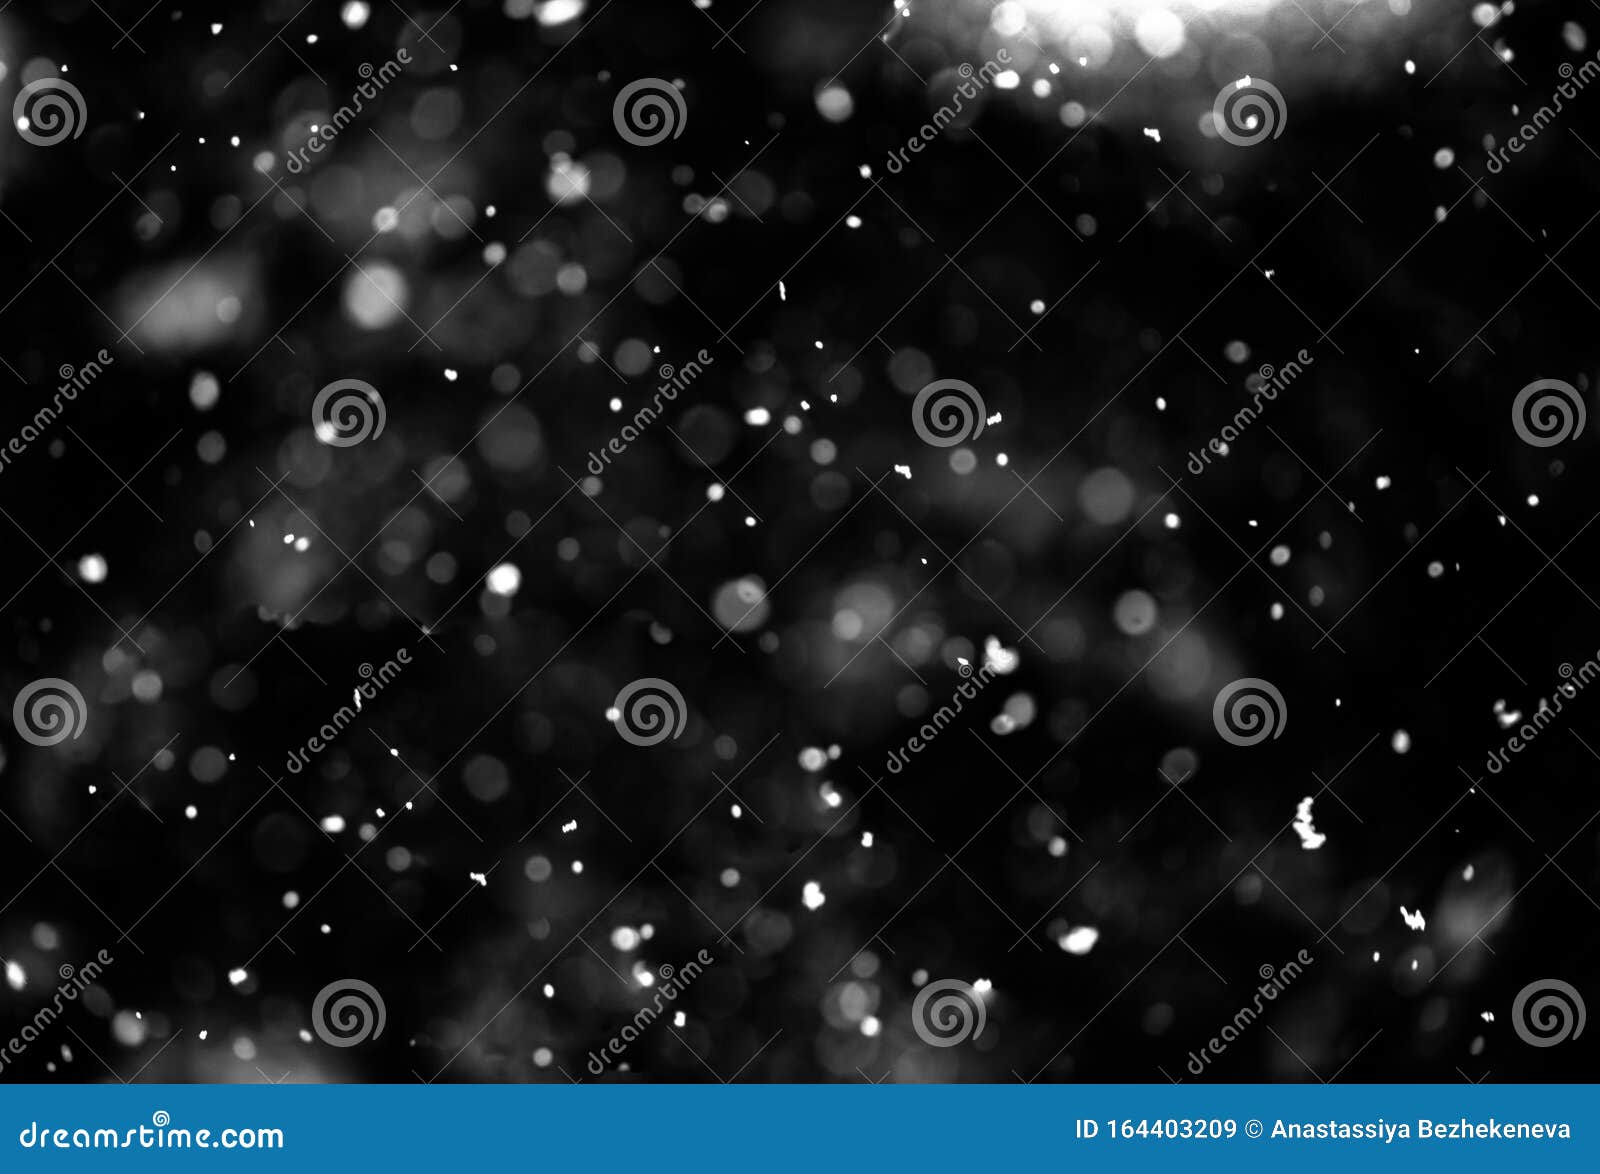 Snow on black background stock image. Image of fall - 164403209